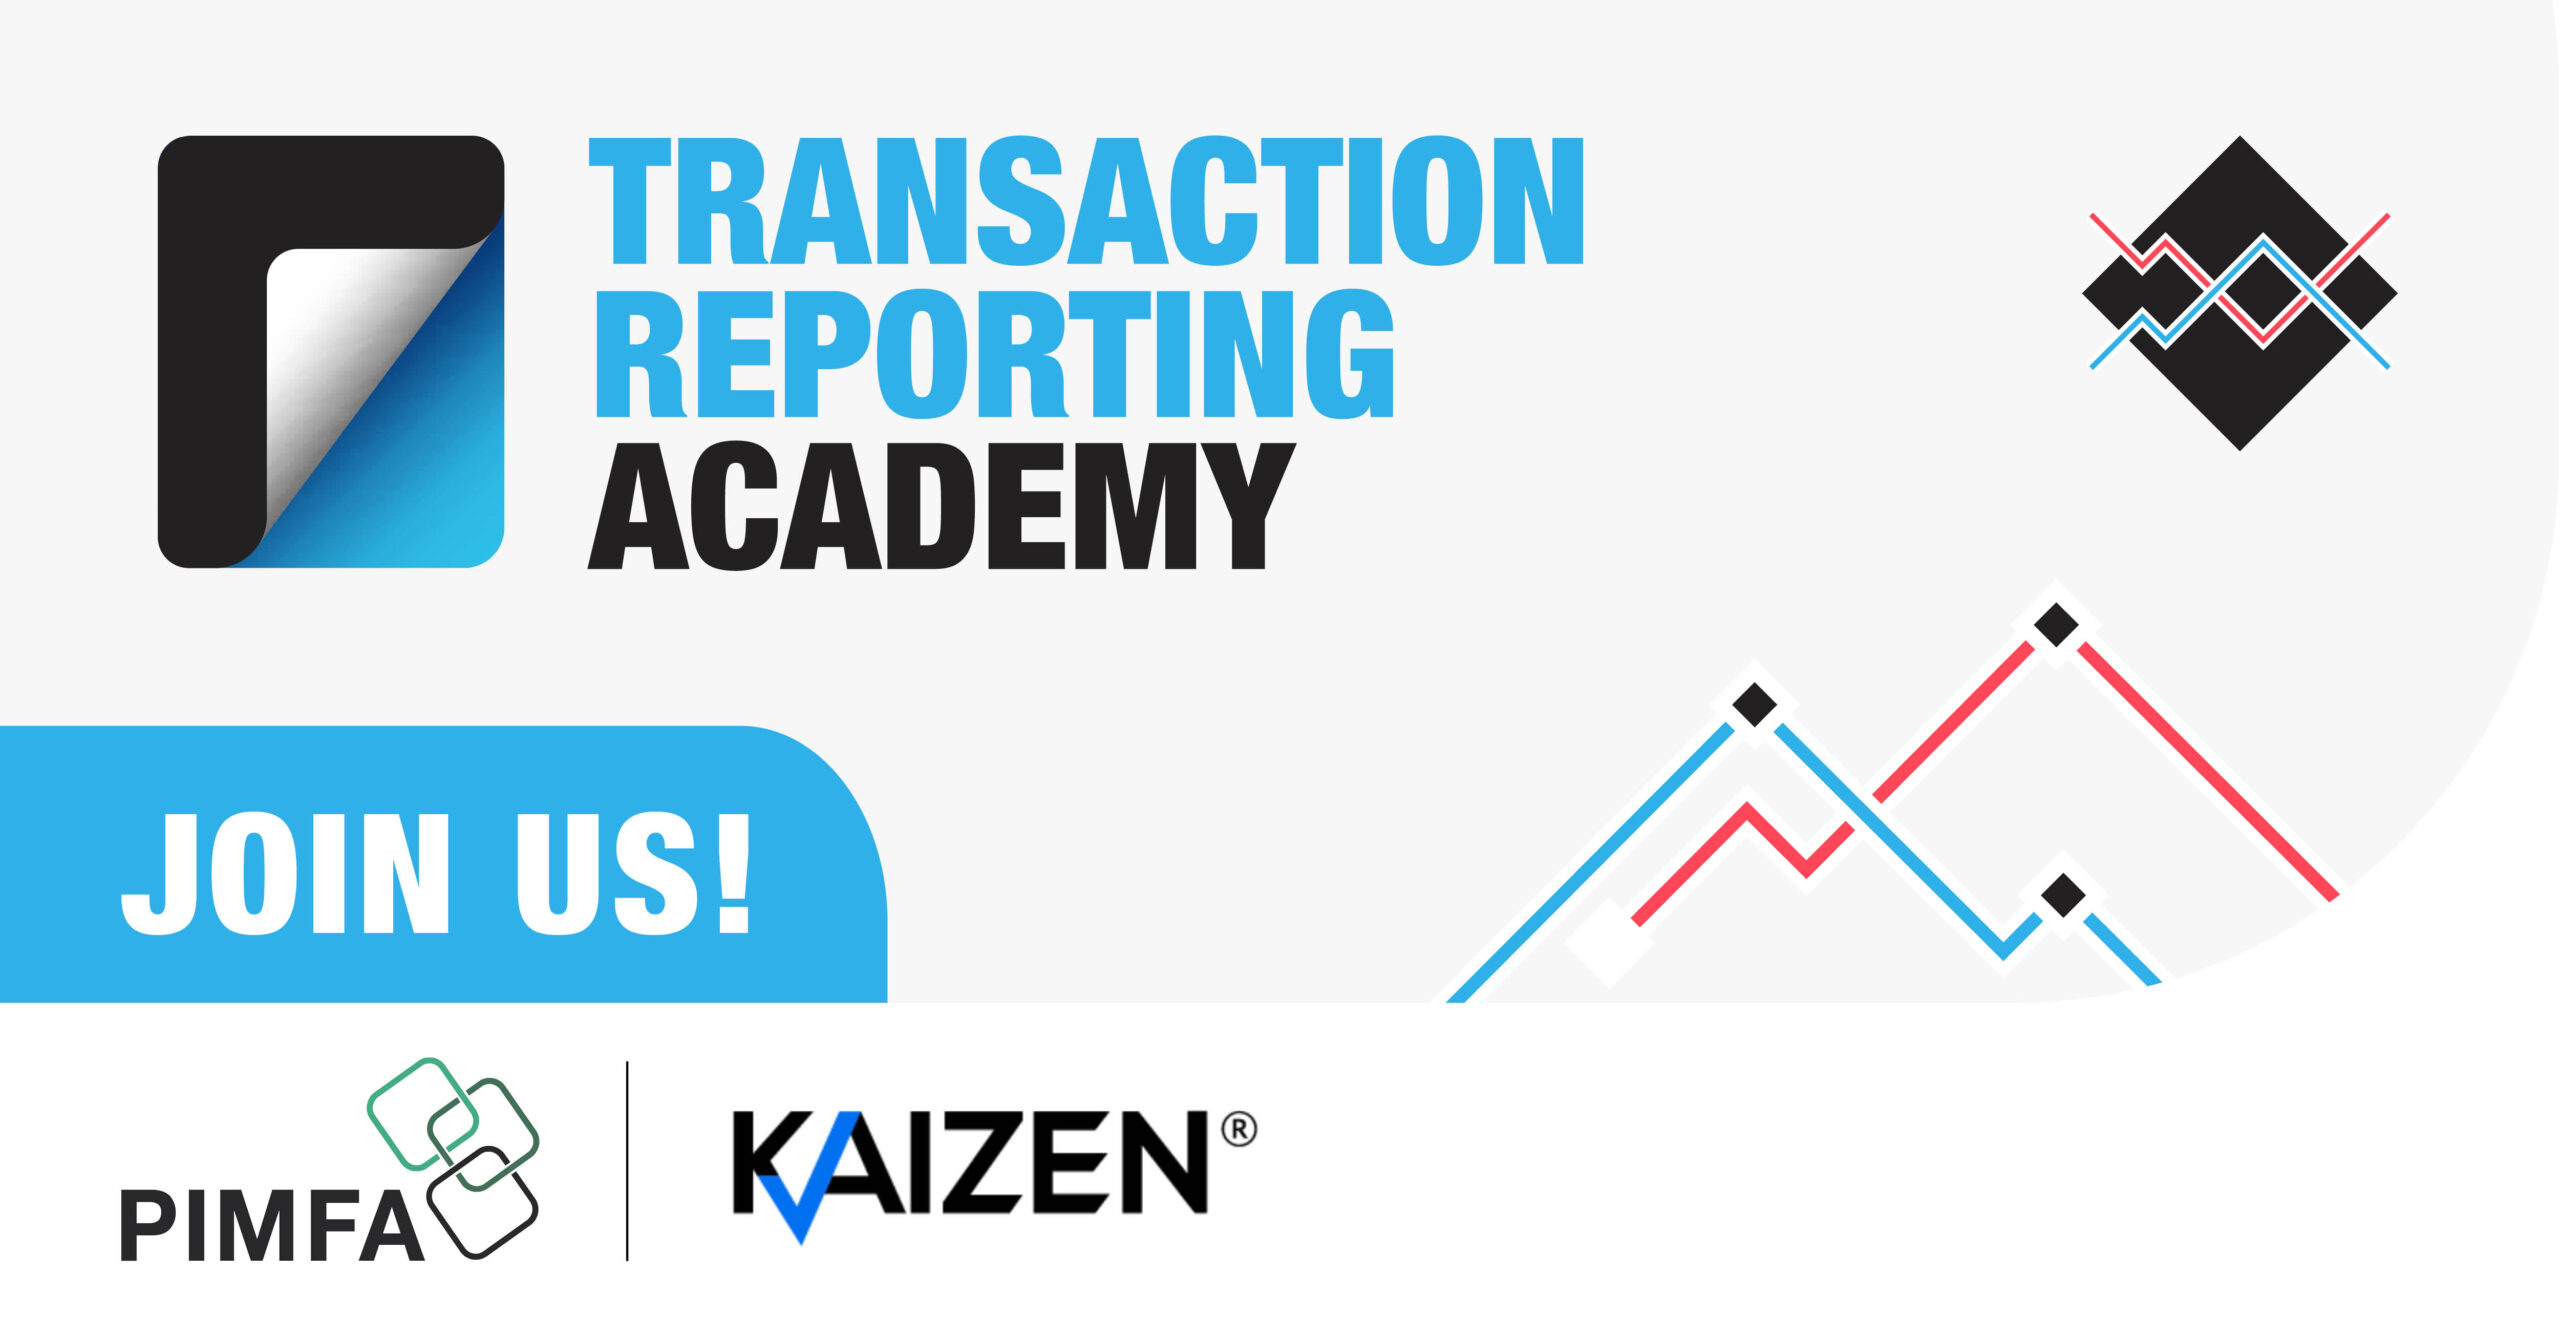 Book your place on the Transaction Reporting Academy